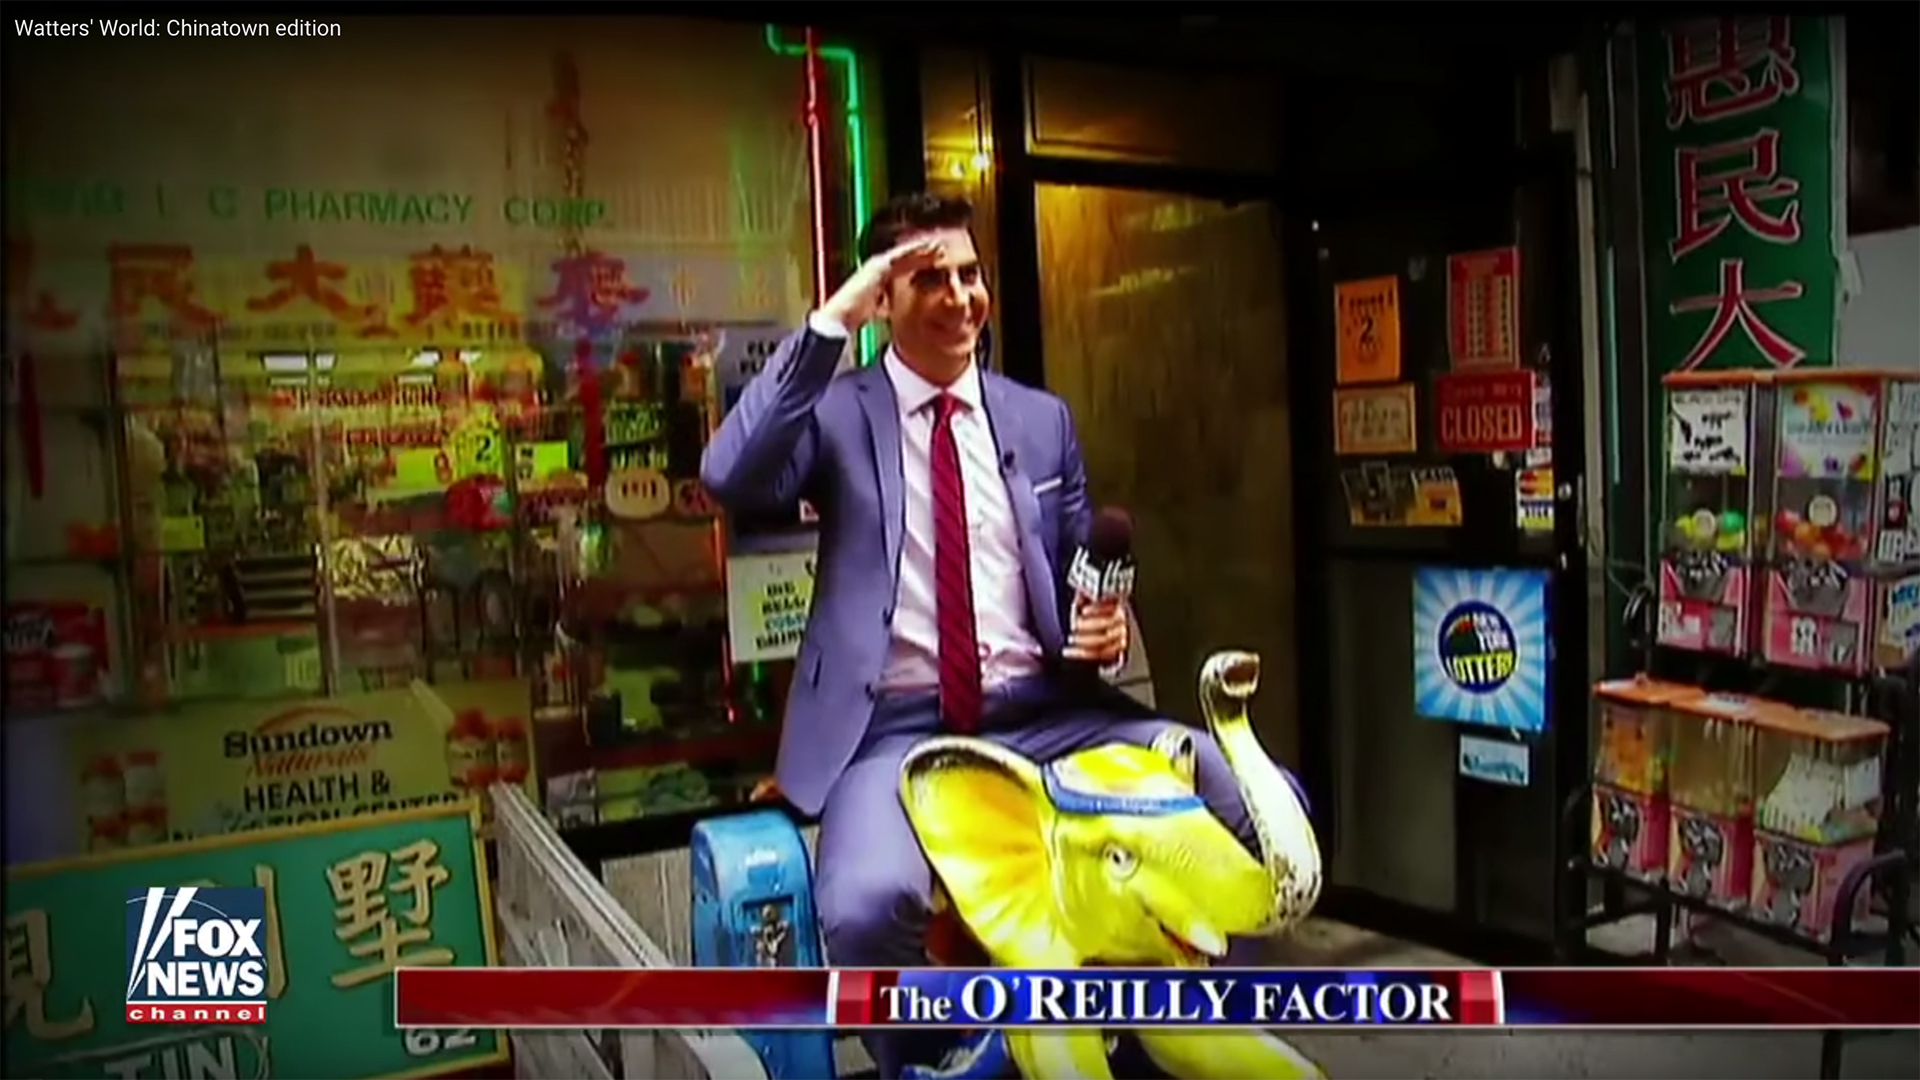 This Fox News ‘humor’ segment on Chinatown has baffled and angered viewers